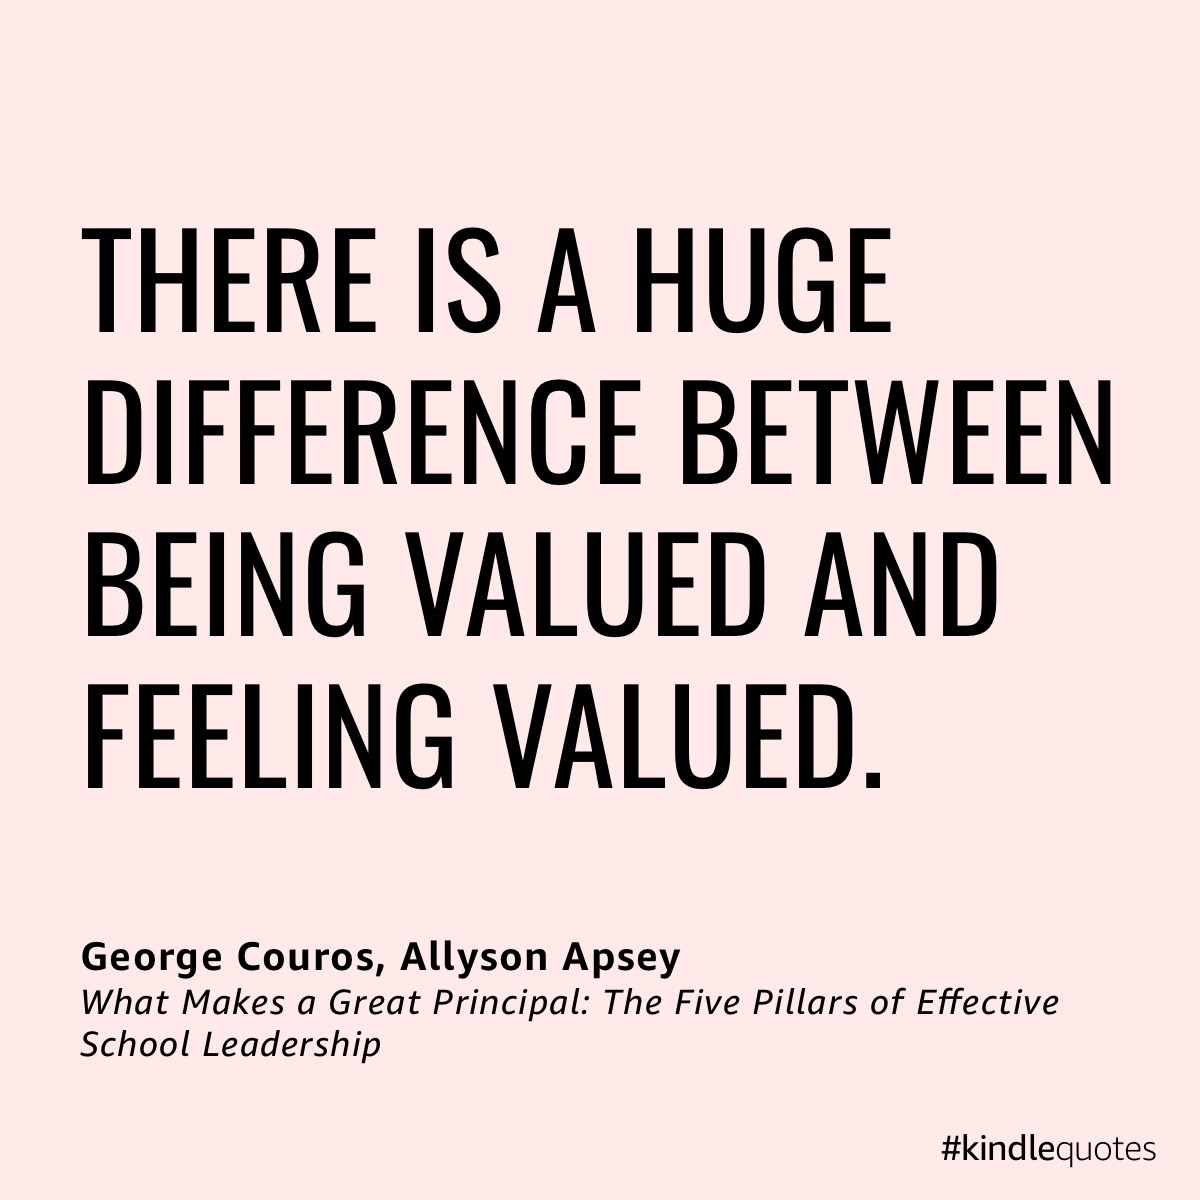 George Couros shares three insightful and inspirational quotes from #WhatMakesAGreatPrincial in this post. Check it out in the link below: mailchi.mp/cfa53c24dc5e/s… Access the book here: a.co/d/bZoe6io.